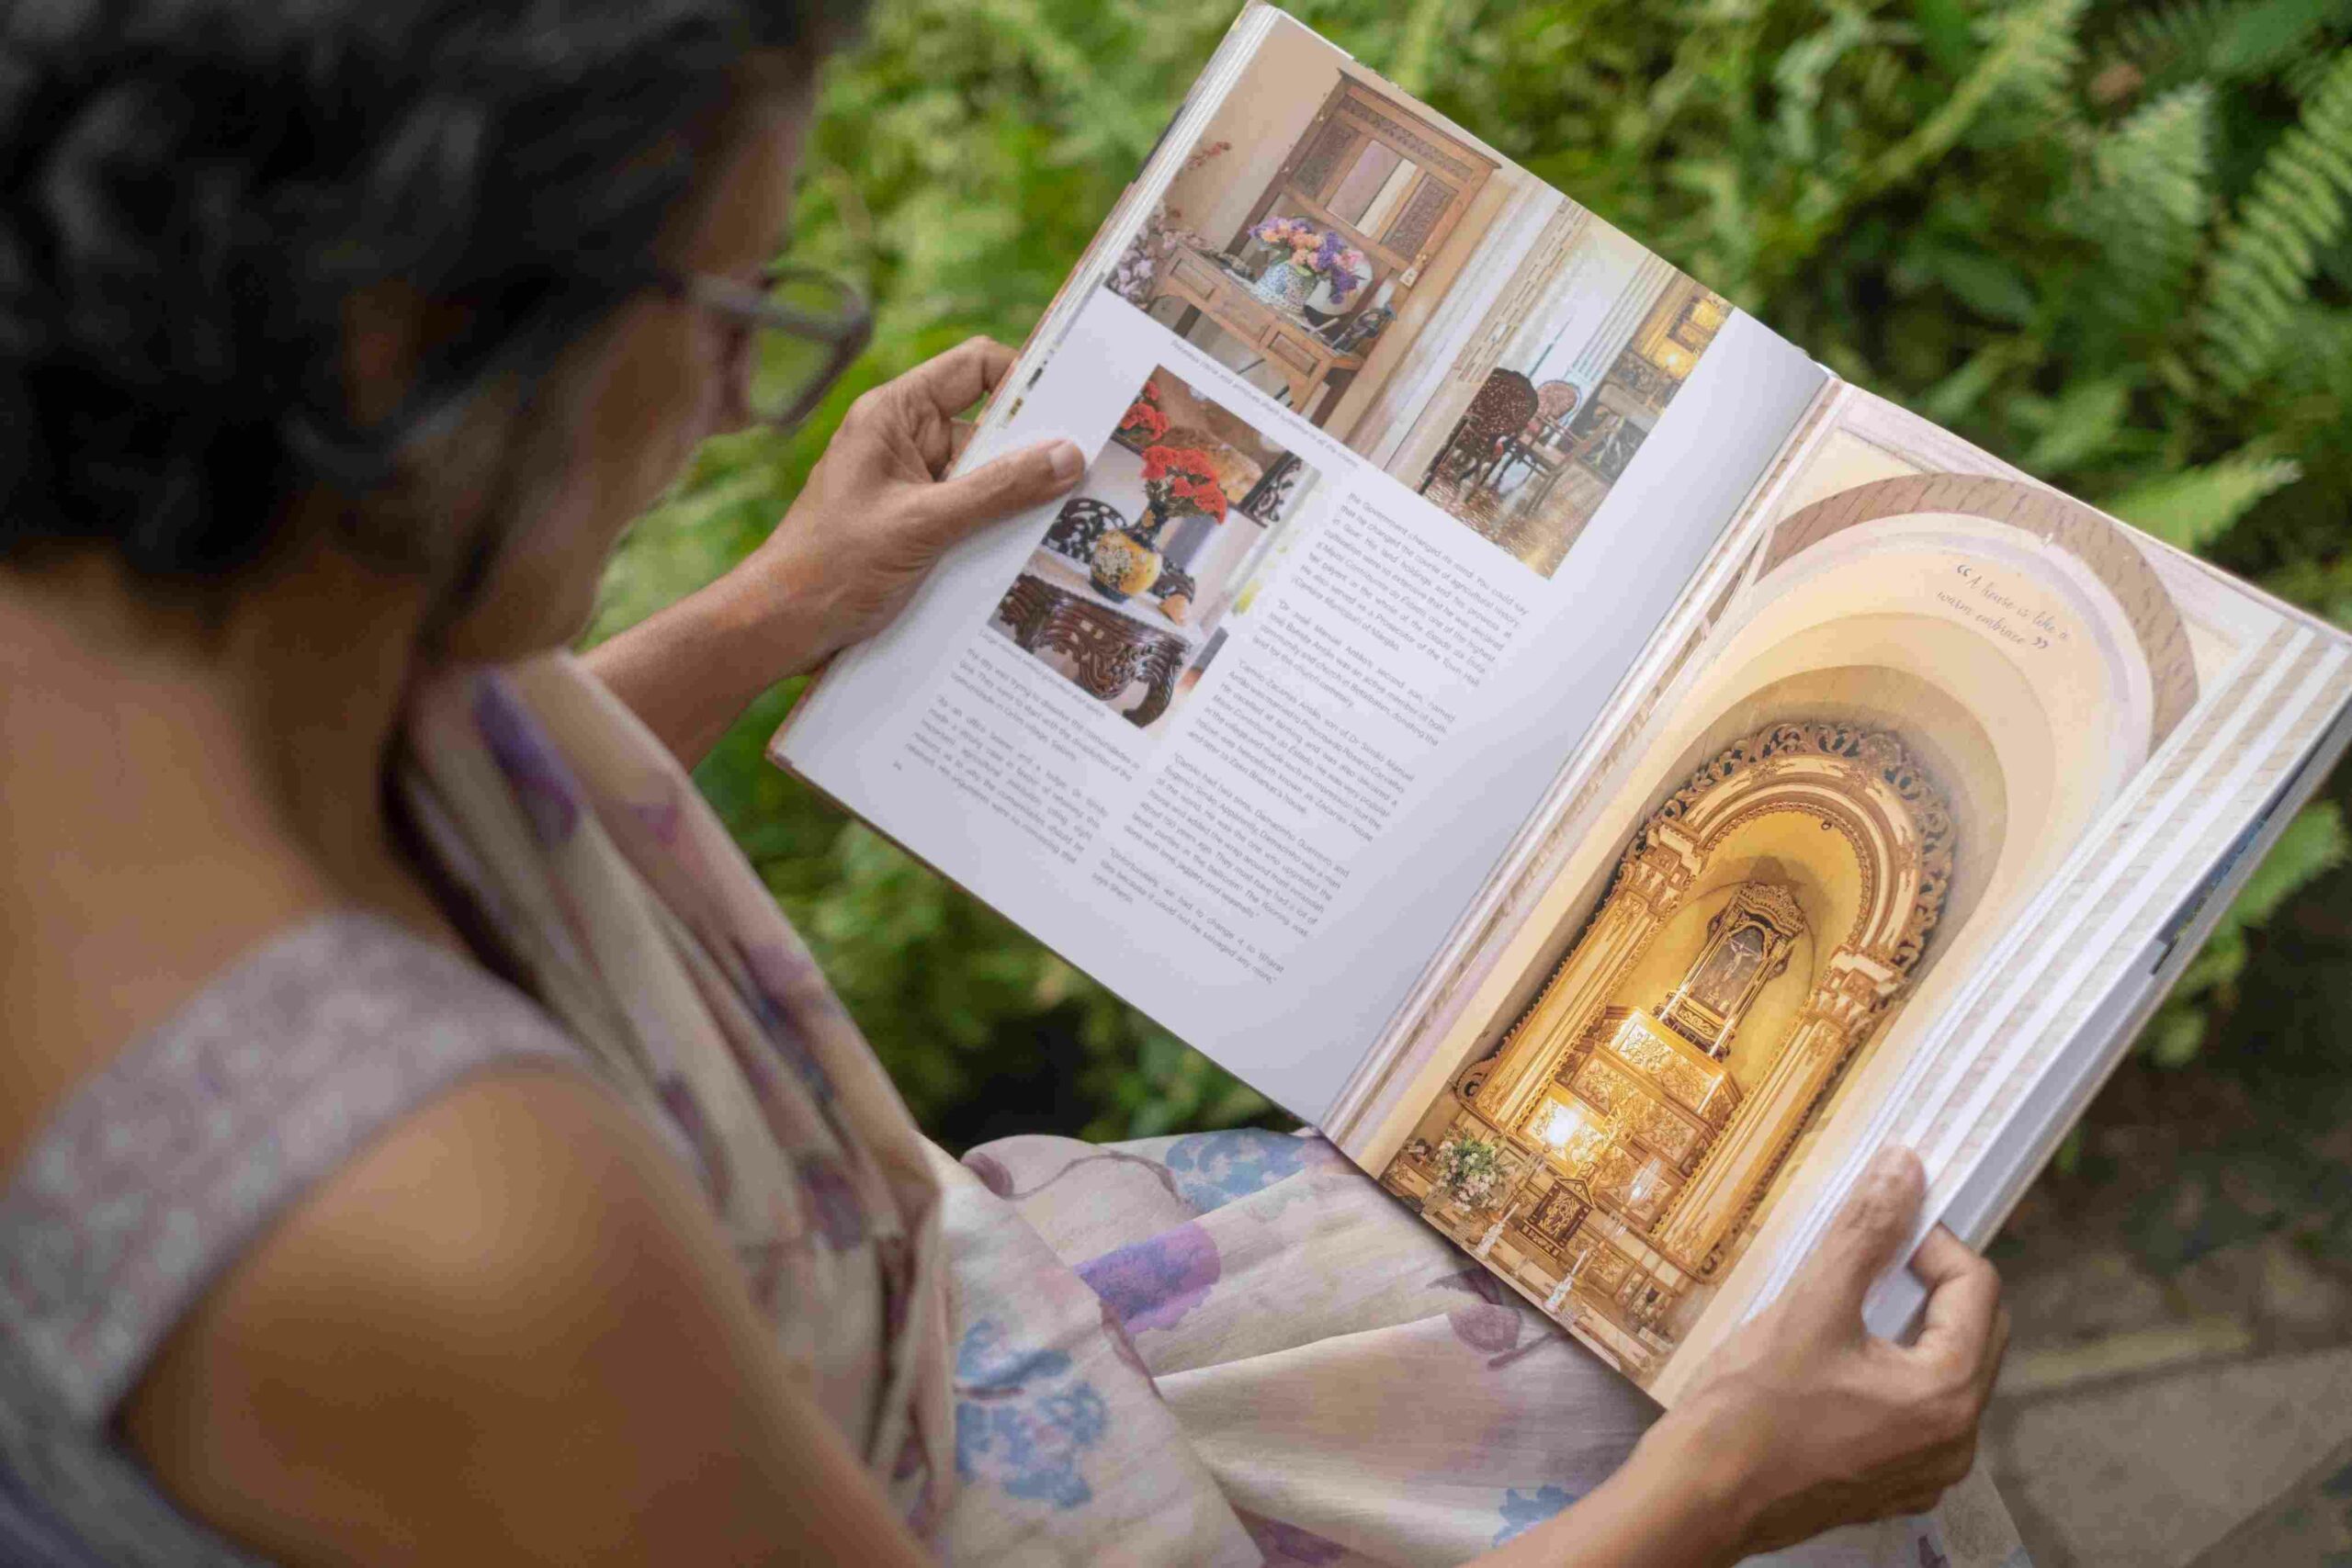 Stories from Goan Homes is a collection of tales centering around 21 families in Goa